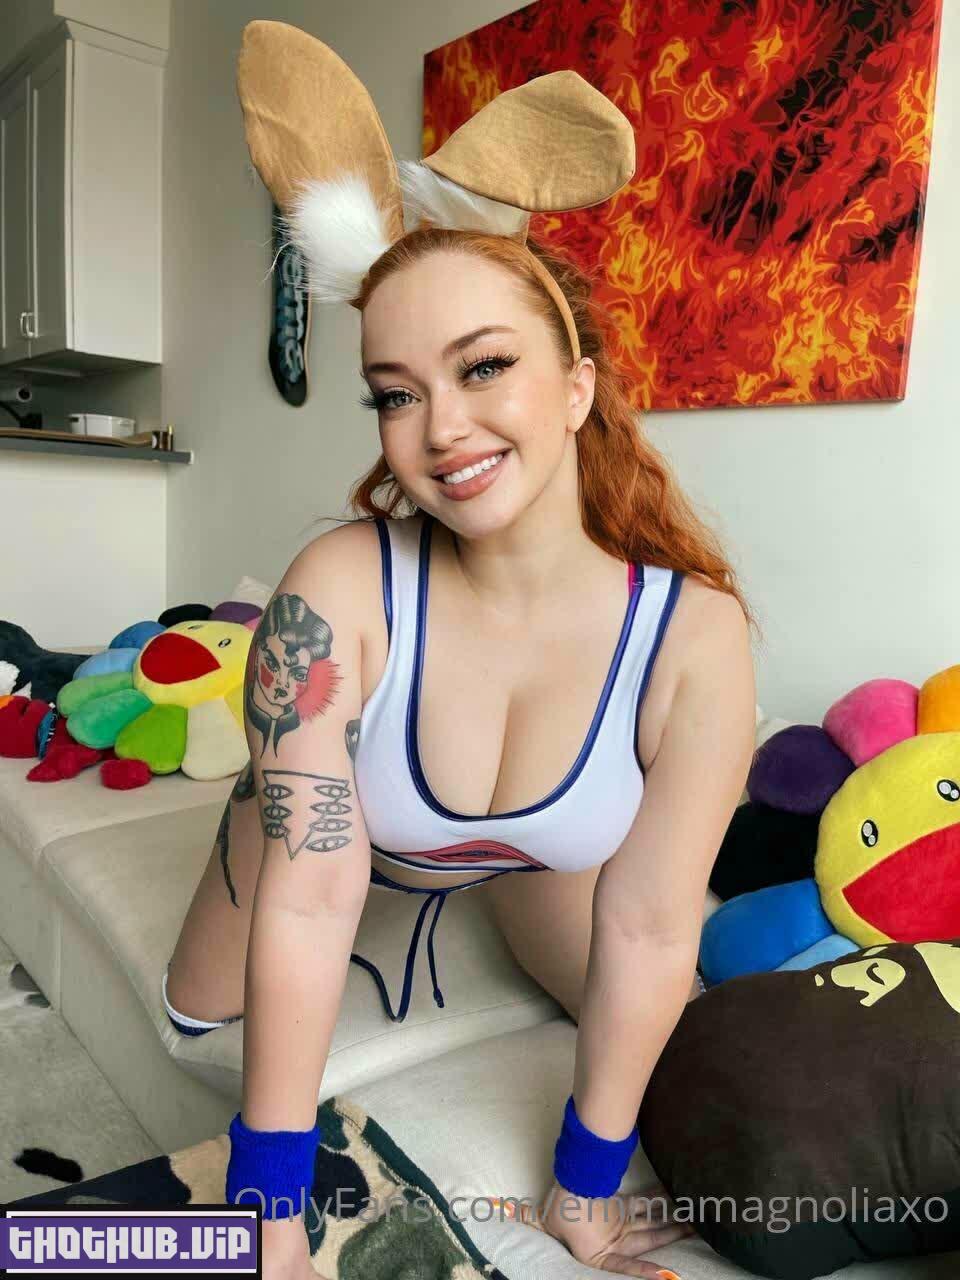 1681477387 324 Emma Magnolia %E2%80%93 Thick Redhead Onlyfans Sextapes Nudes